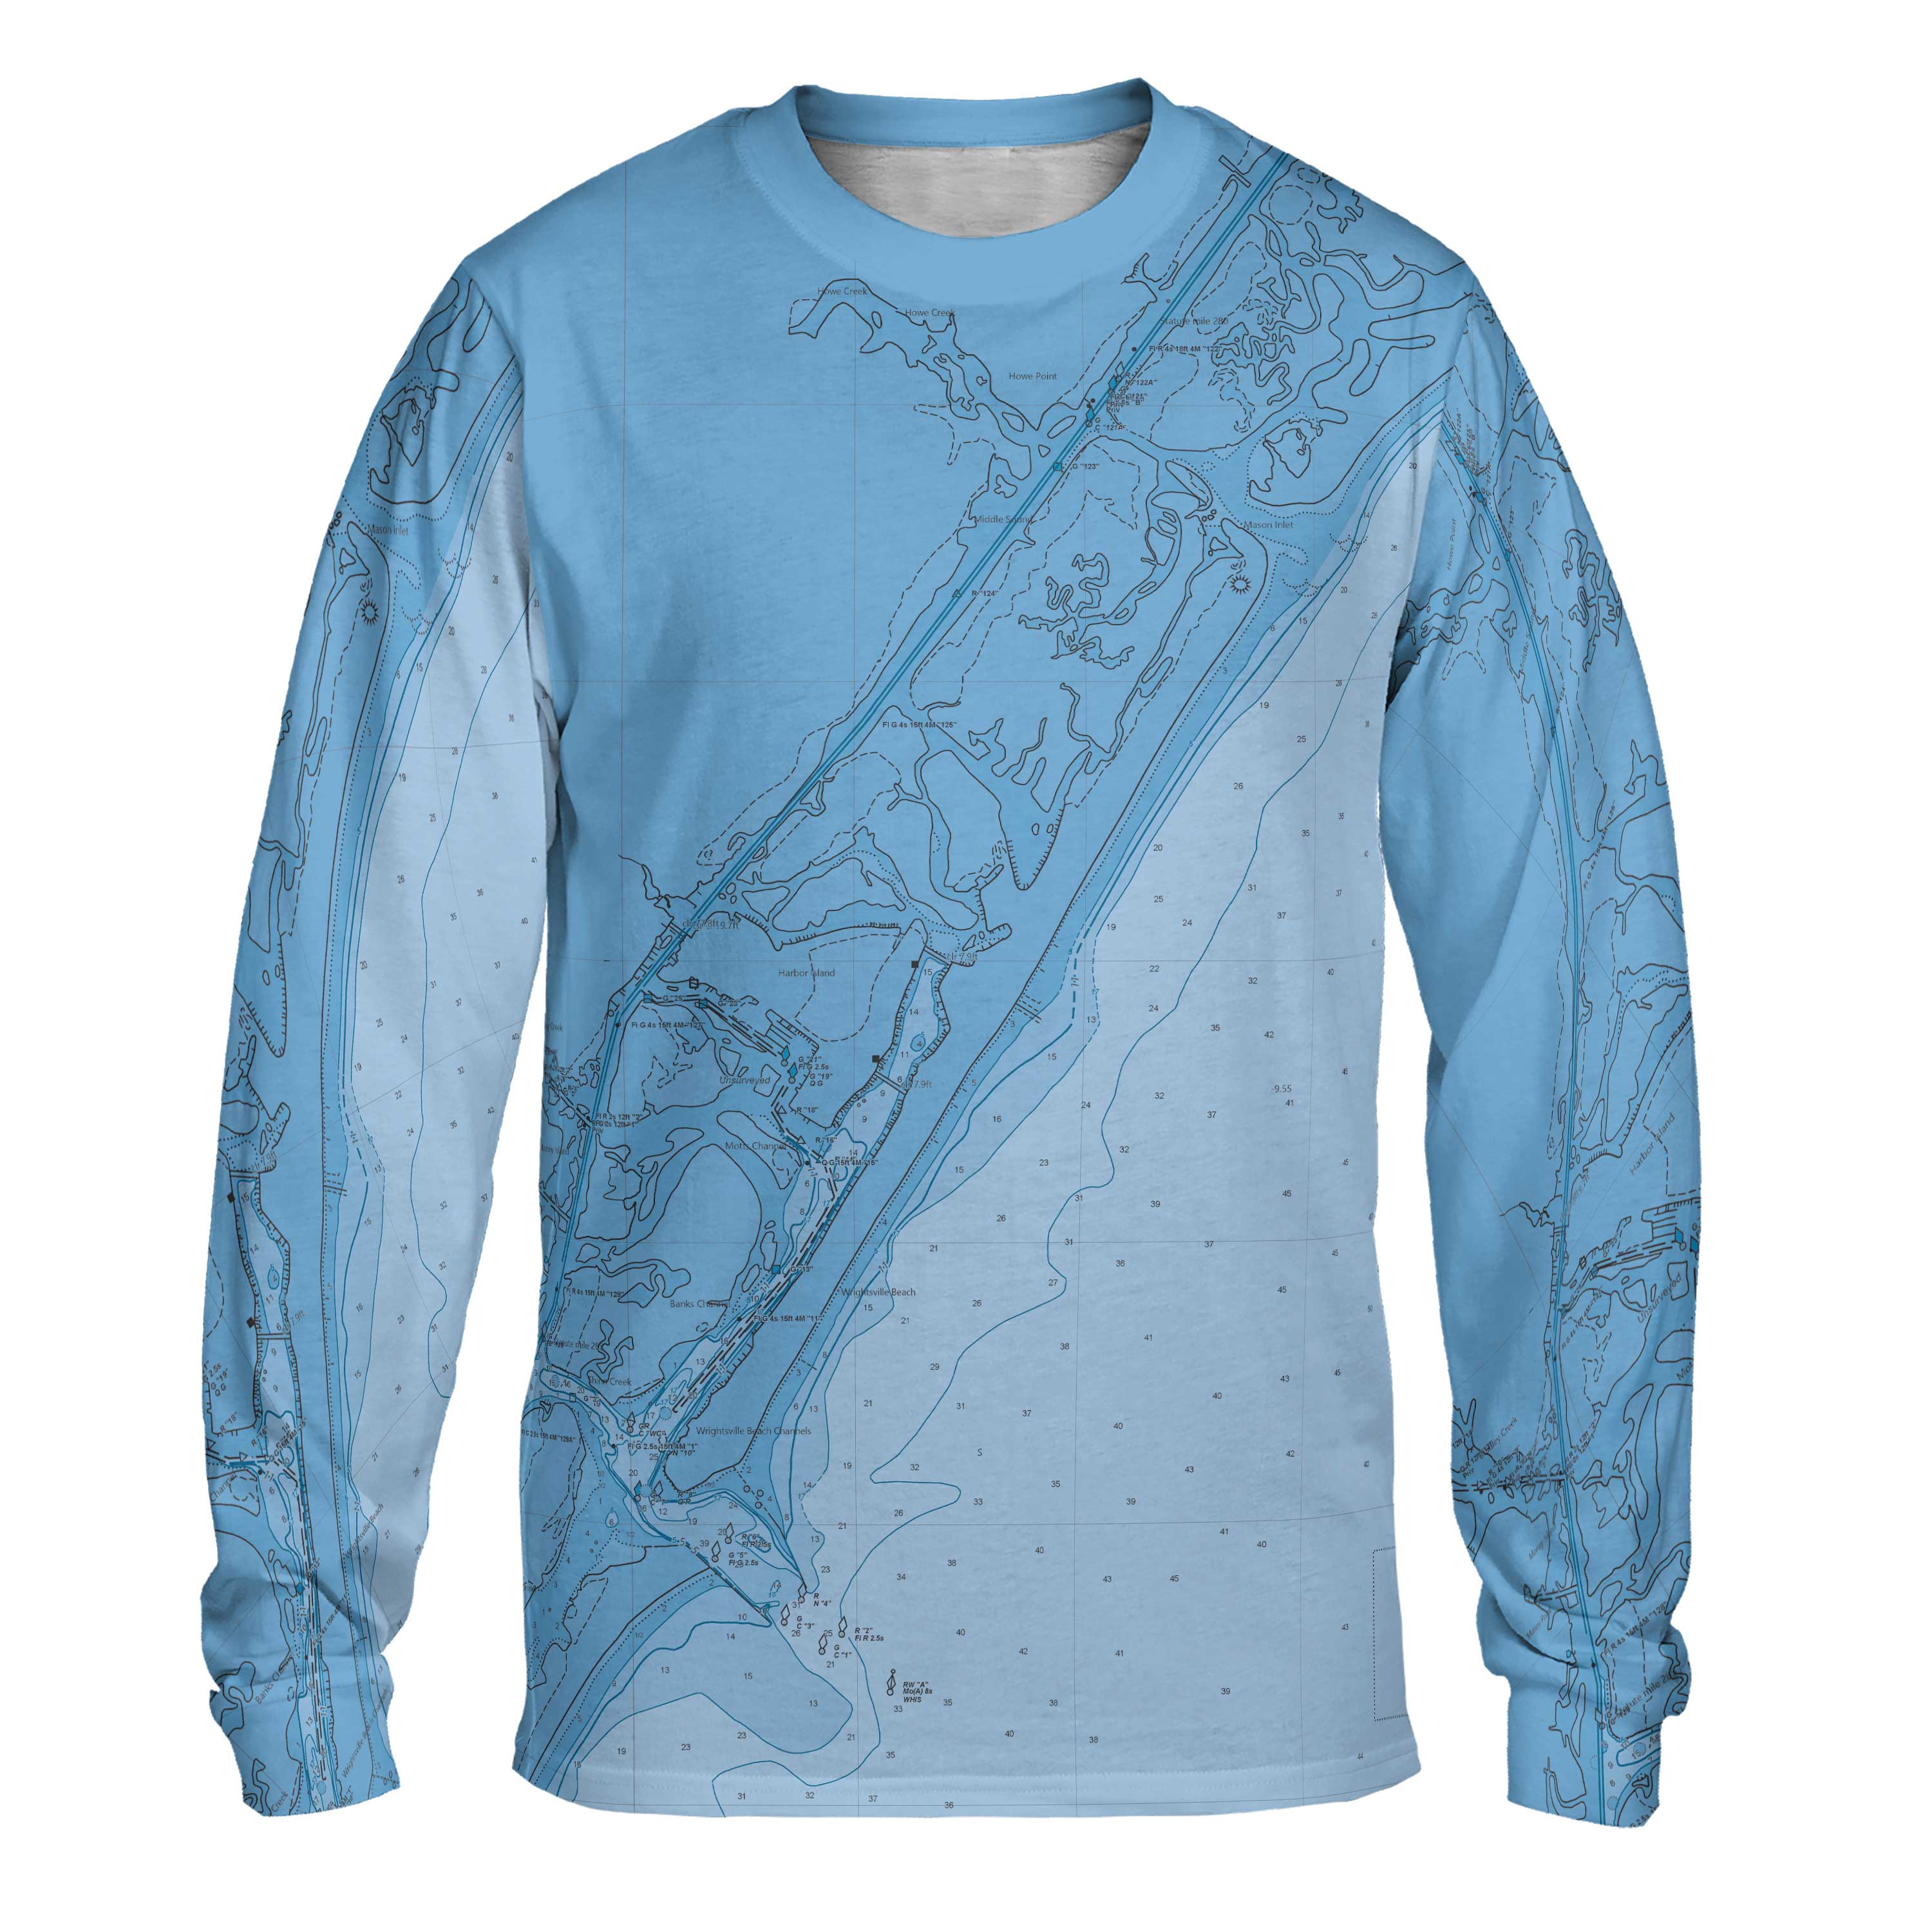 The Wrightsville Beach Blues Long Sleeve Performance Tee